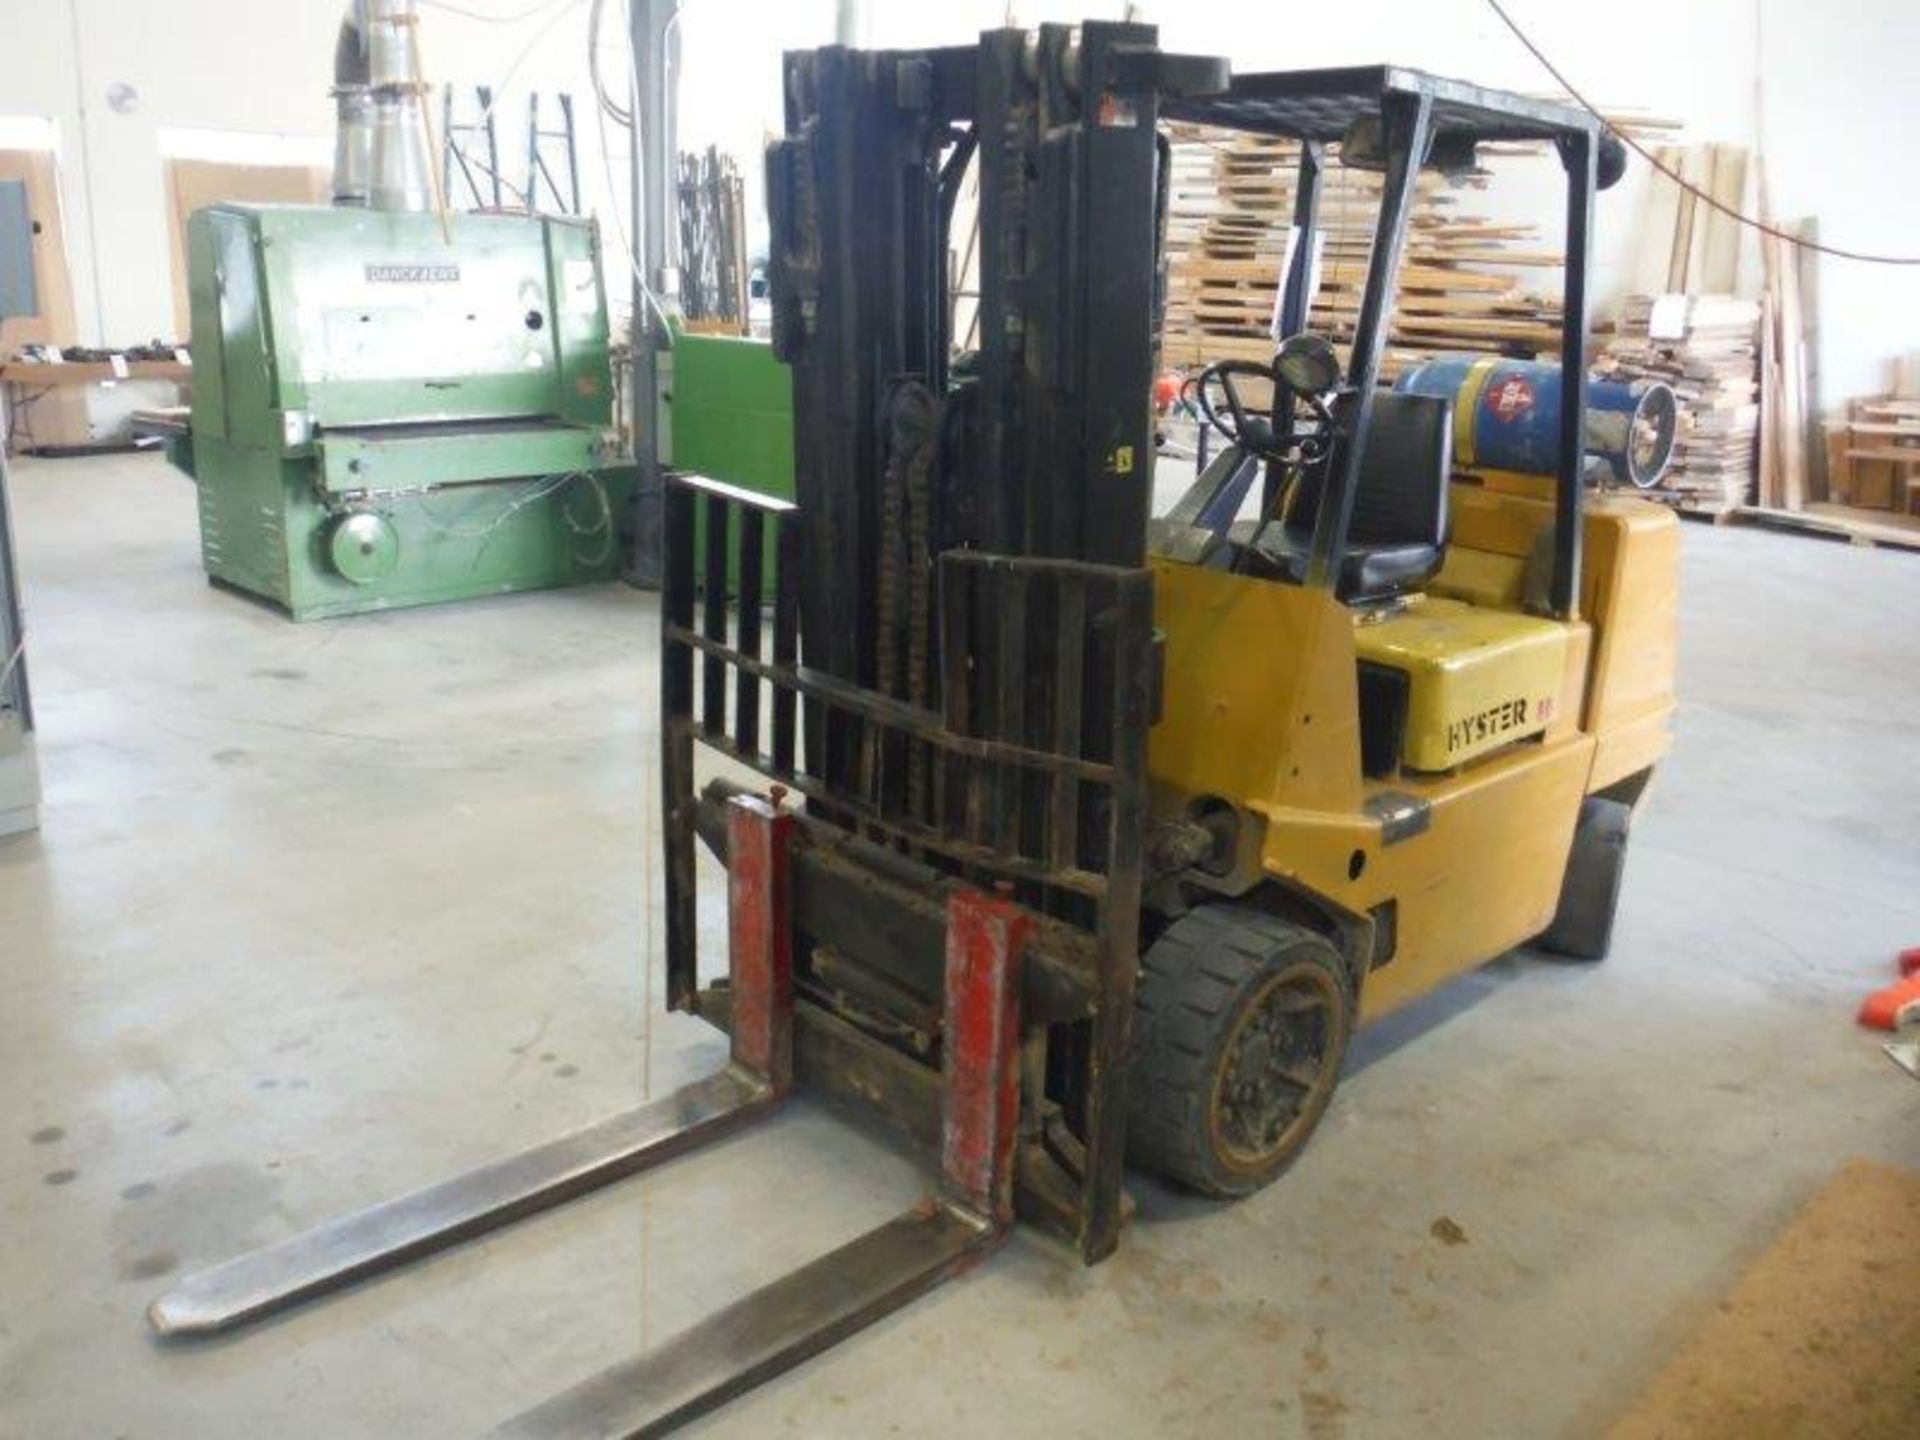 HYSTER PROPANE LIFT TRUCK, 8,000 LBS CAP. SIDE-SHIFT, HARD TIRES, 172'' HEIGHT, C/W EXTENSION FORKS - Image 2 of 9